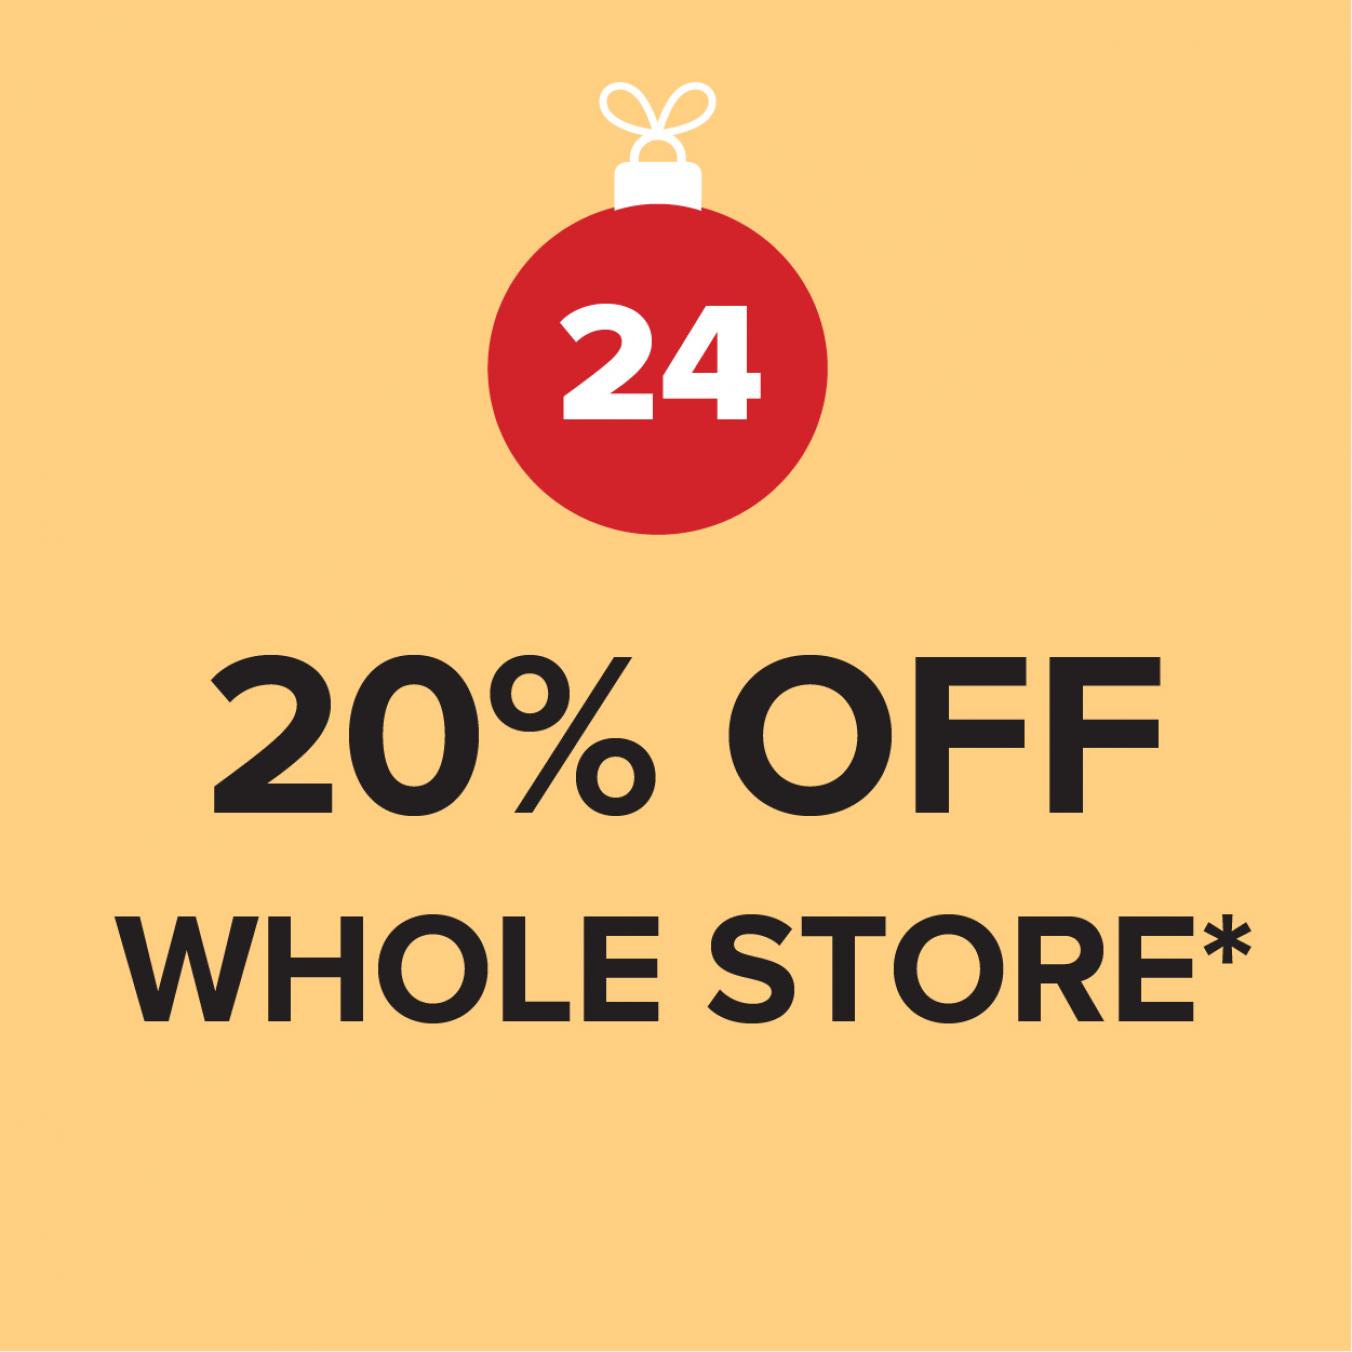 Merry Canna-Mas Eve! 20% Off Whole Store